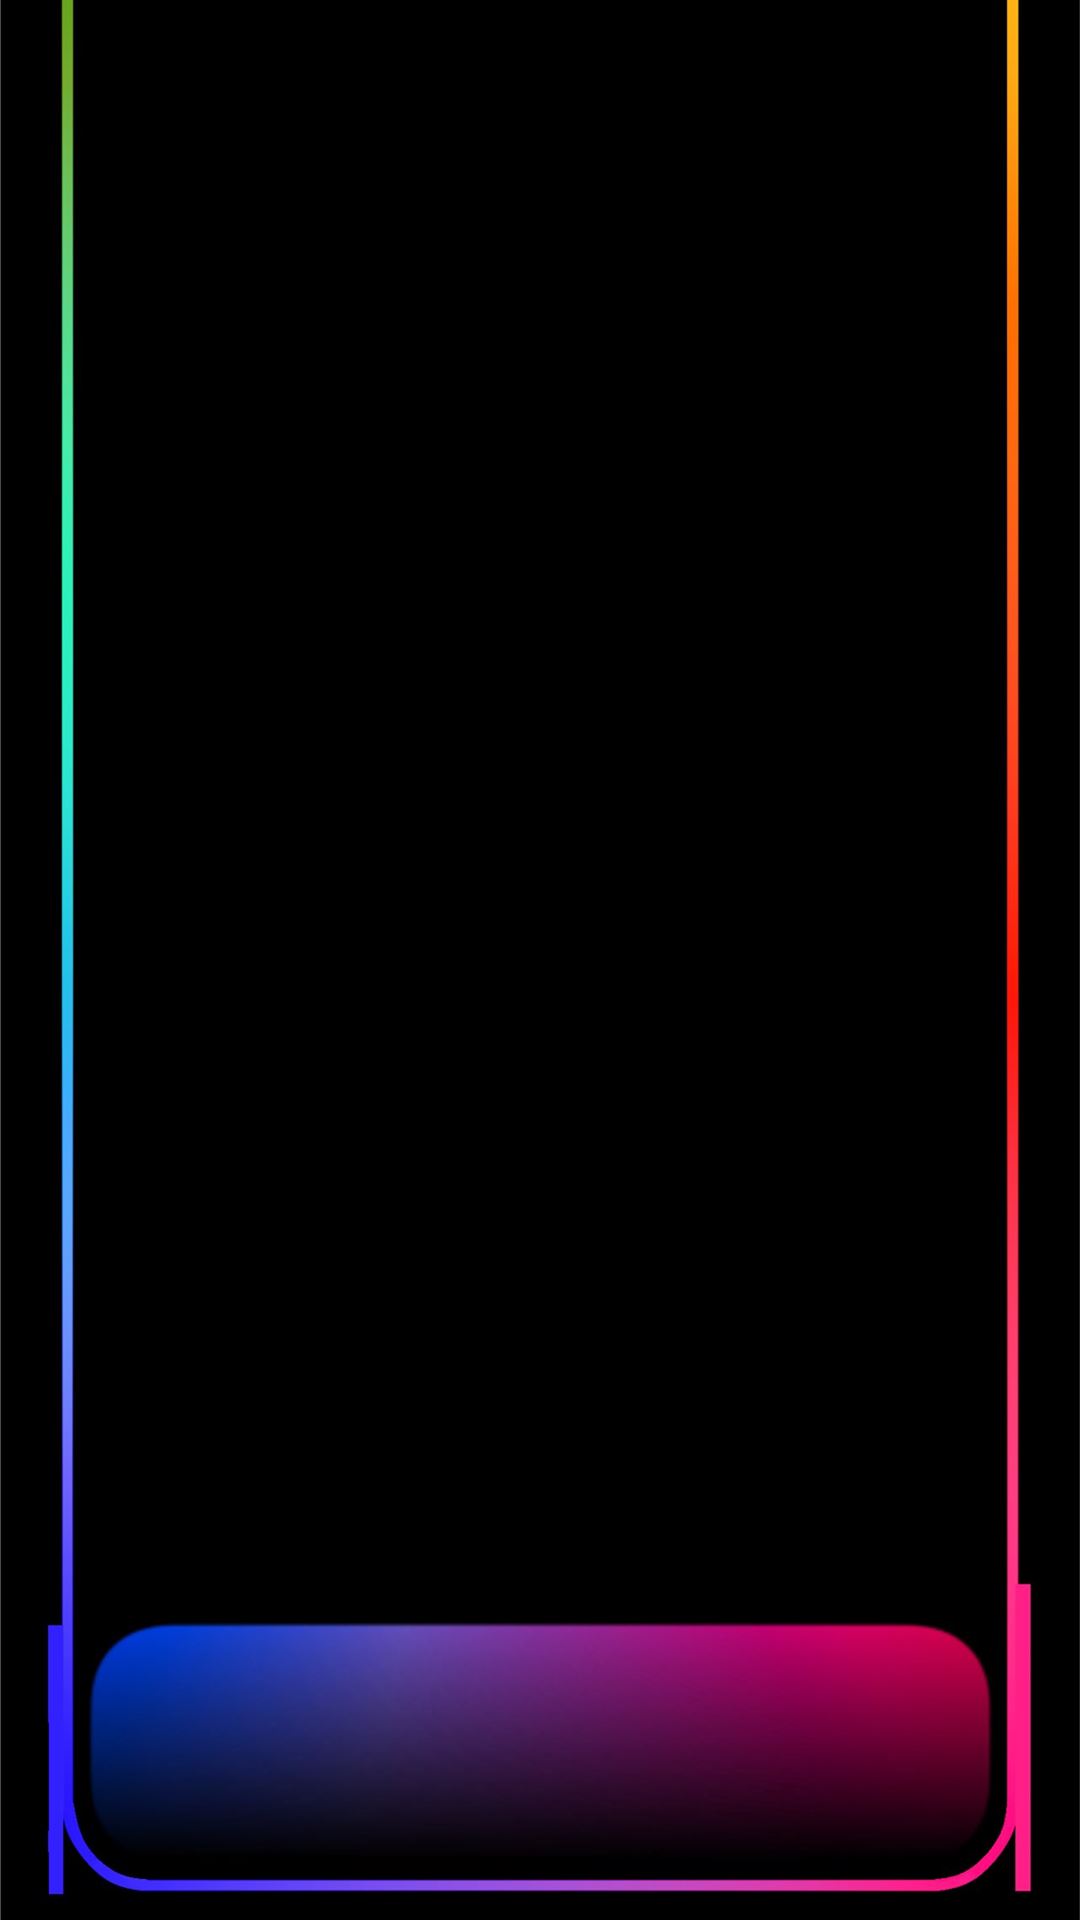 Max Outline iPhone Wallpaper Free Download